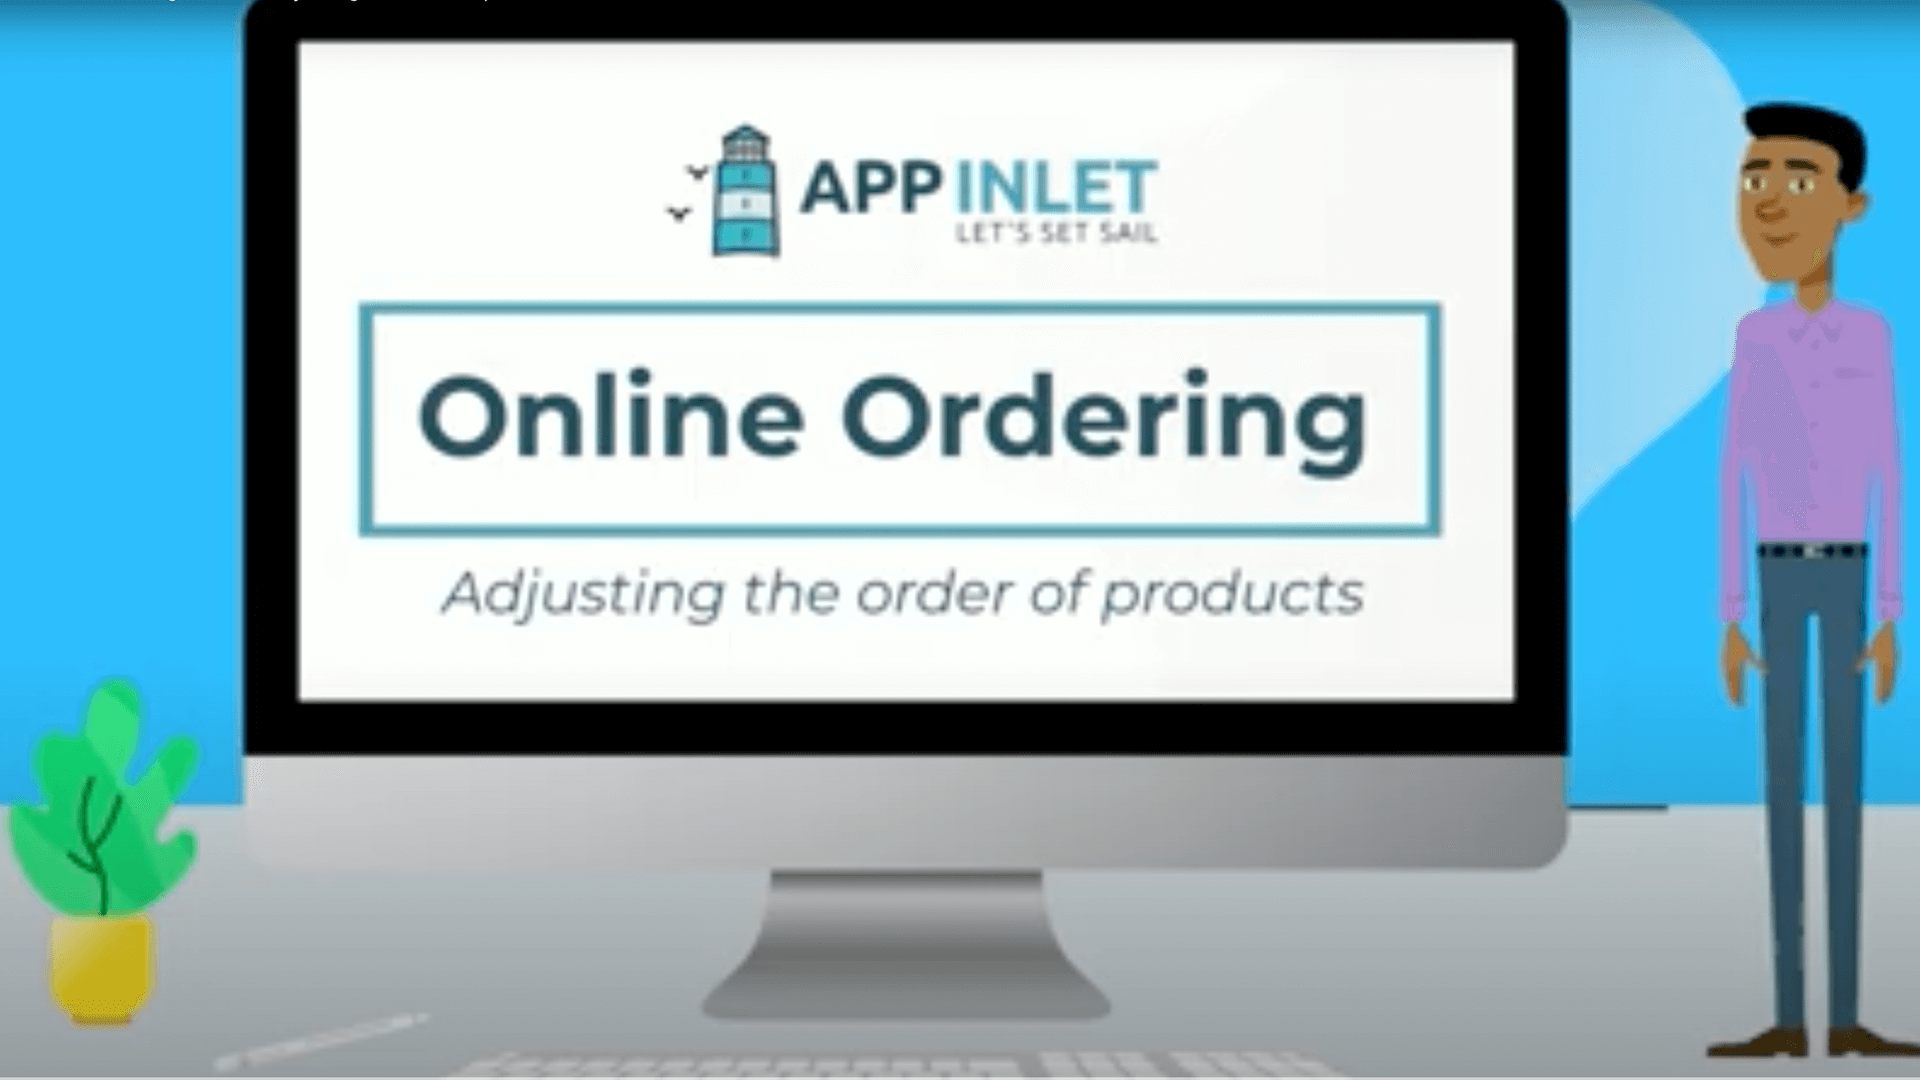 Adjusting the order of products – 7 of 11